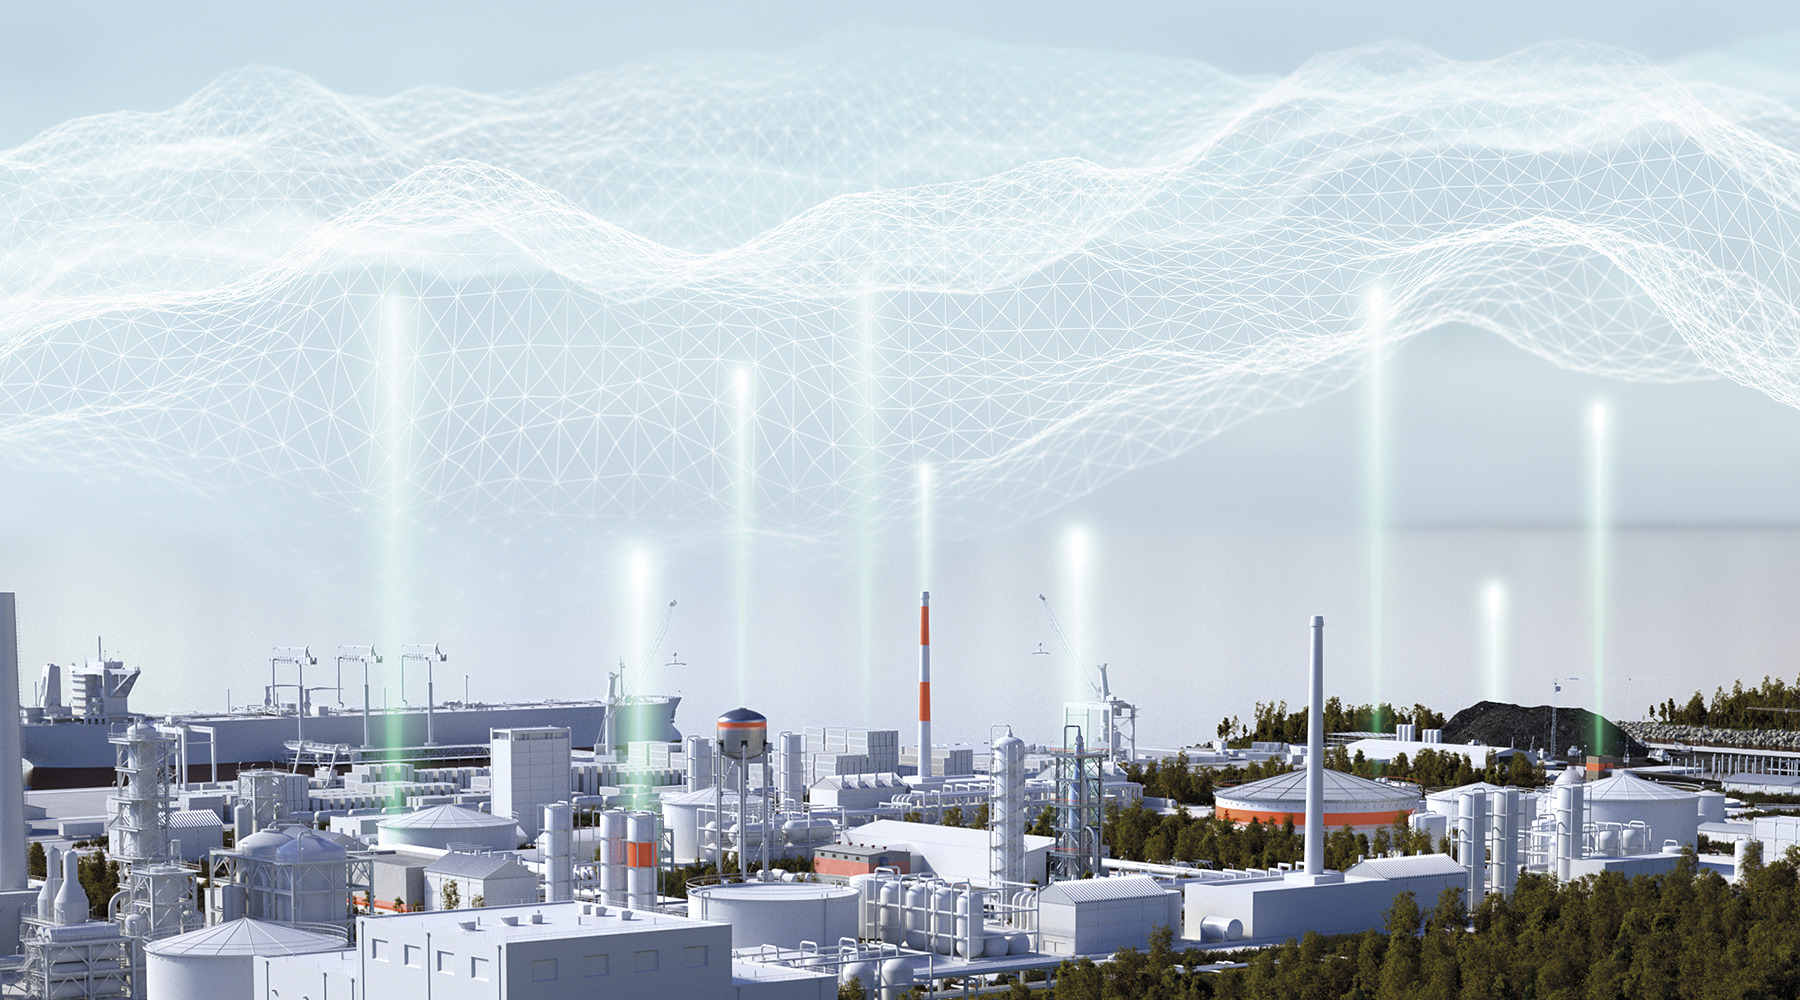 Ethernet-APL for digitalization of the process industry, Pepperl+Fuchs